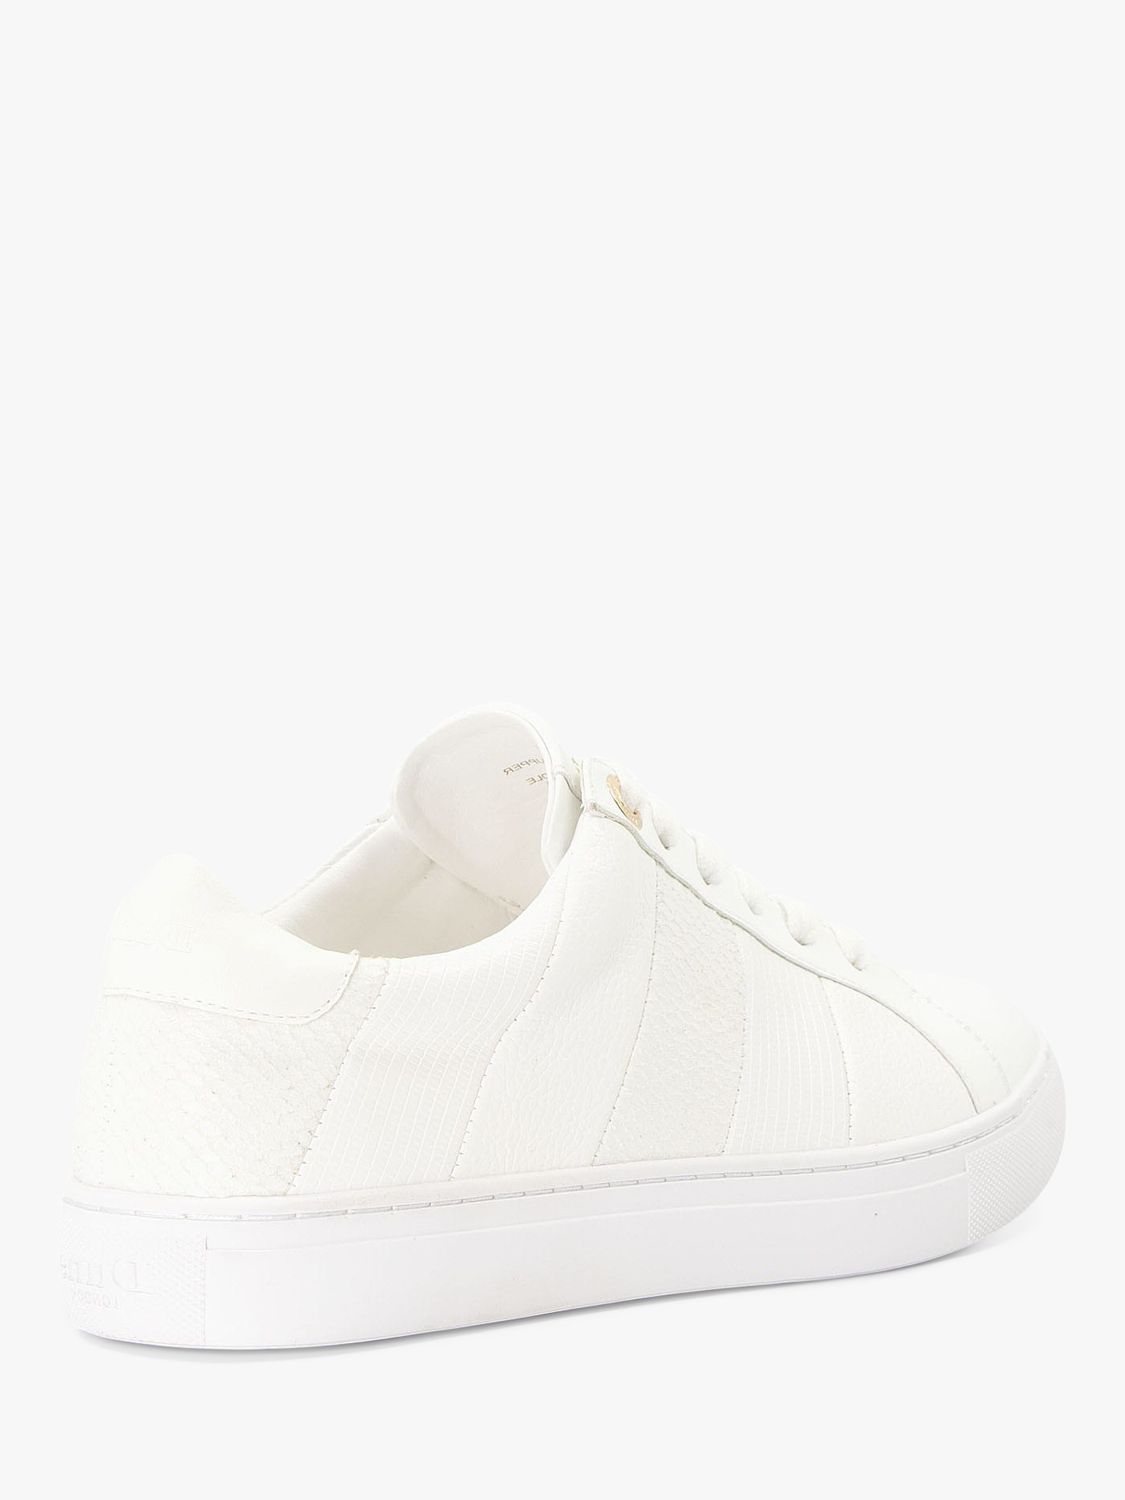 Dune Everleigh Panel Lace Up Trainers, White at John Lewis & Partners